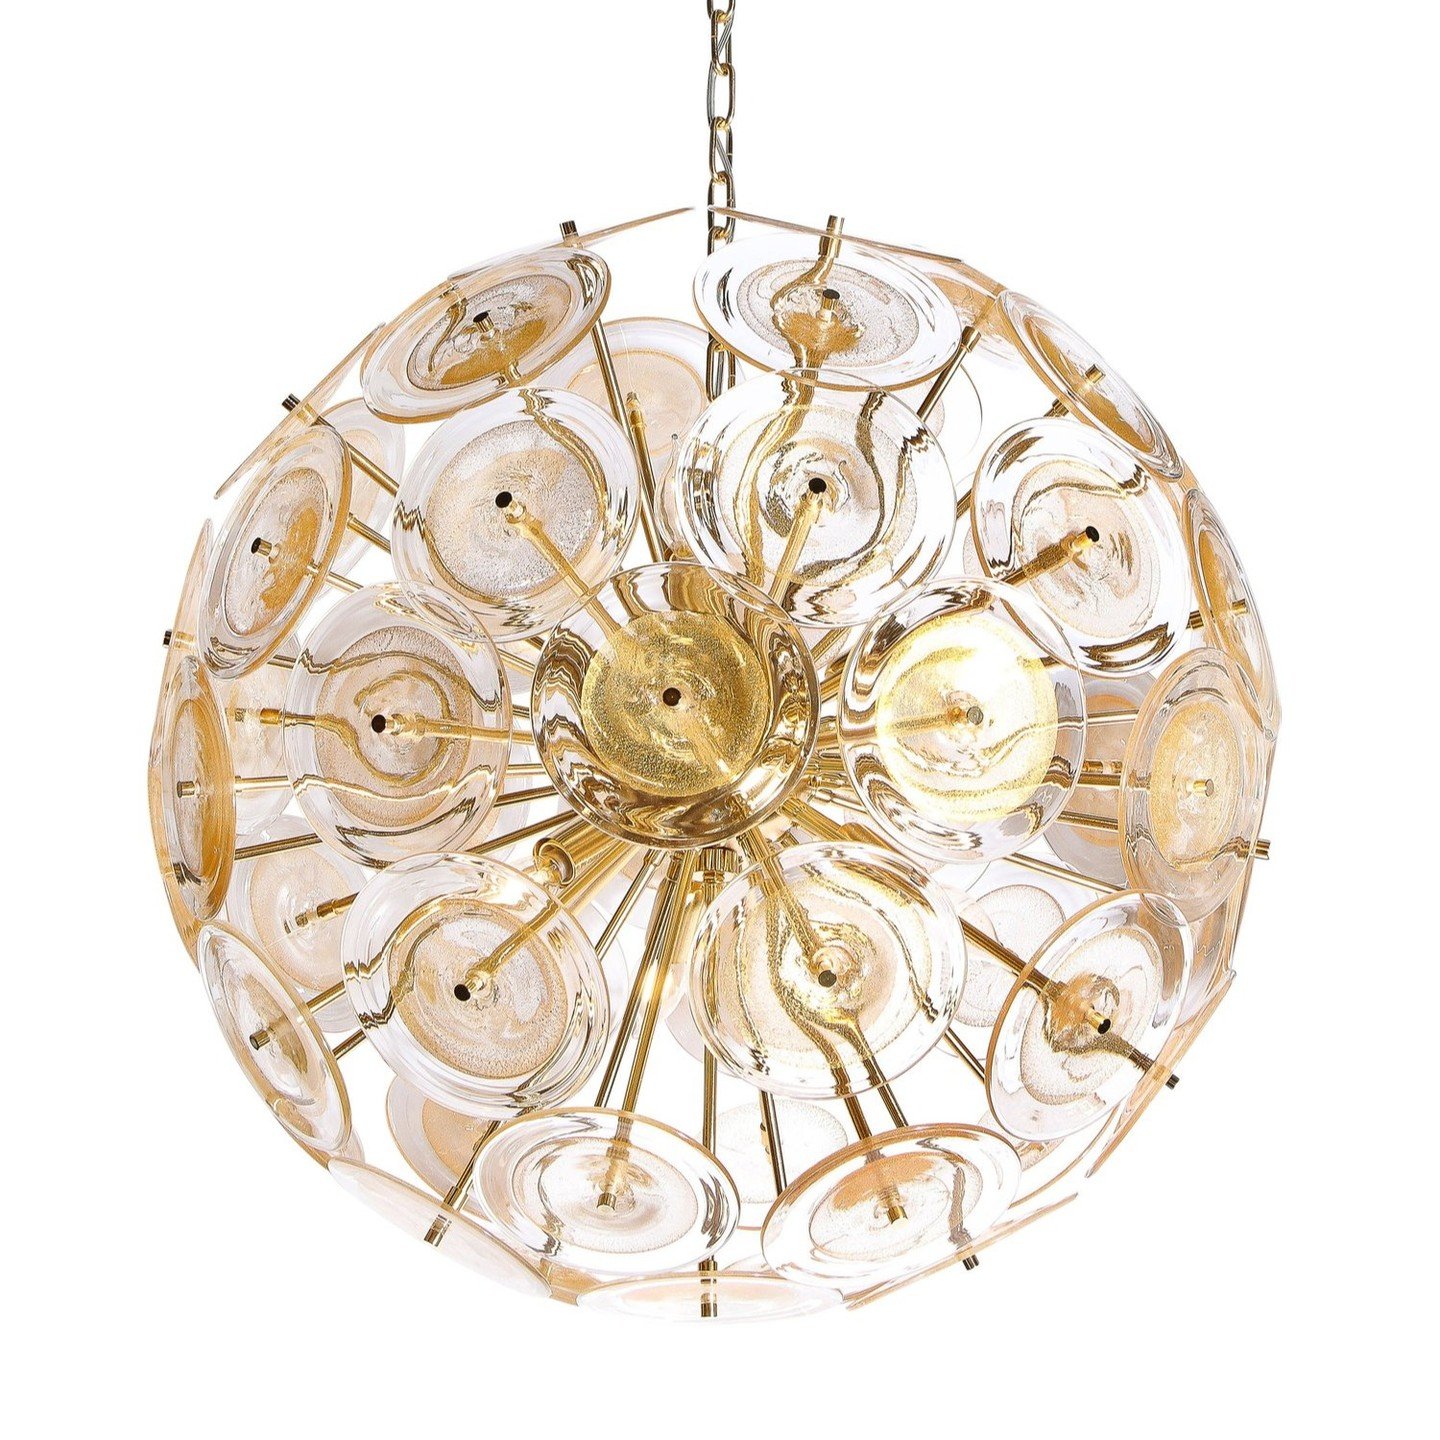 Modernist Brass Sputnik Chandelier W/ Handblown Translucent Murano Glass Discs

This dramatic and graphic Sputnik was realized in Murano, Italy- the island off the coast of Venice renowned for centuries for its superlative glass production. It featur